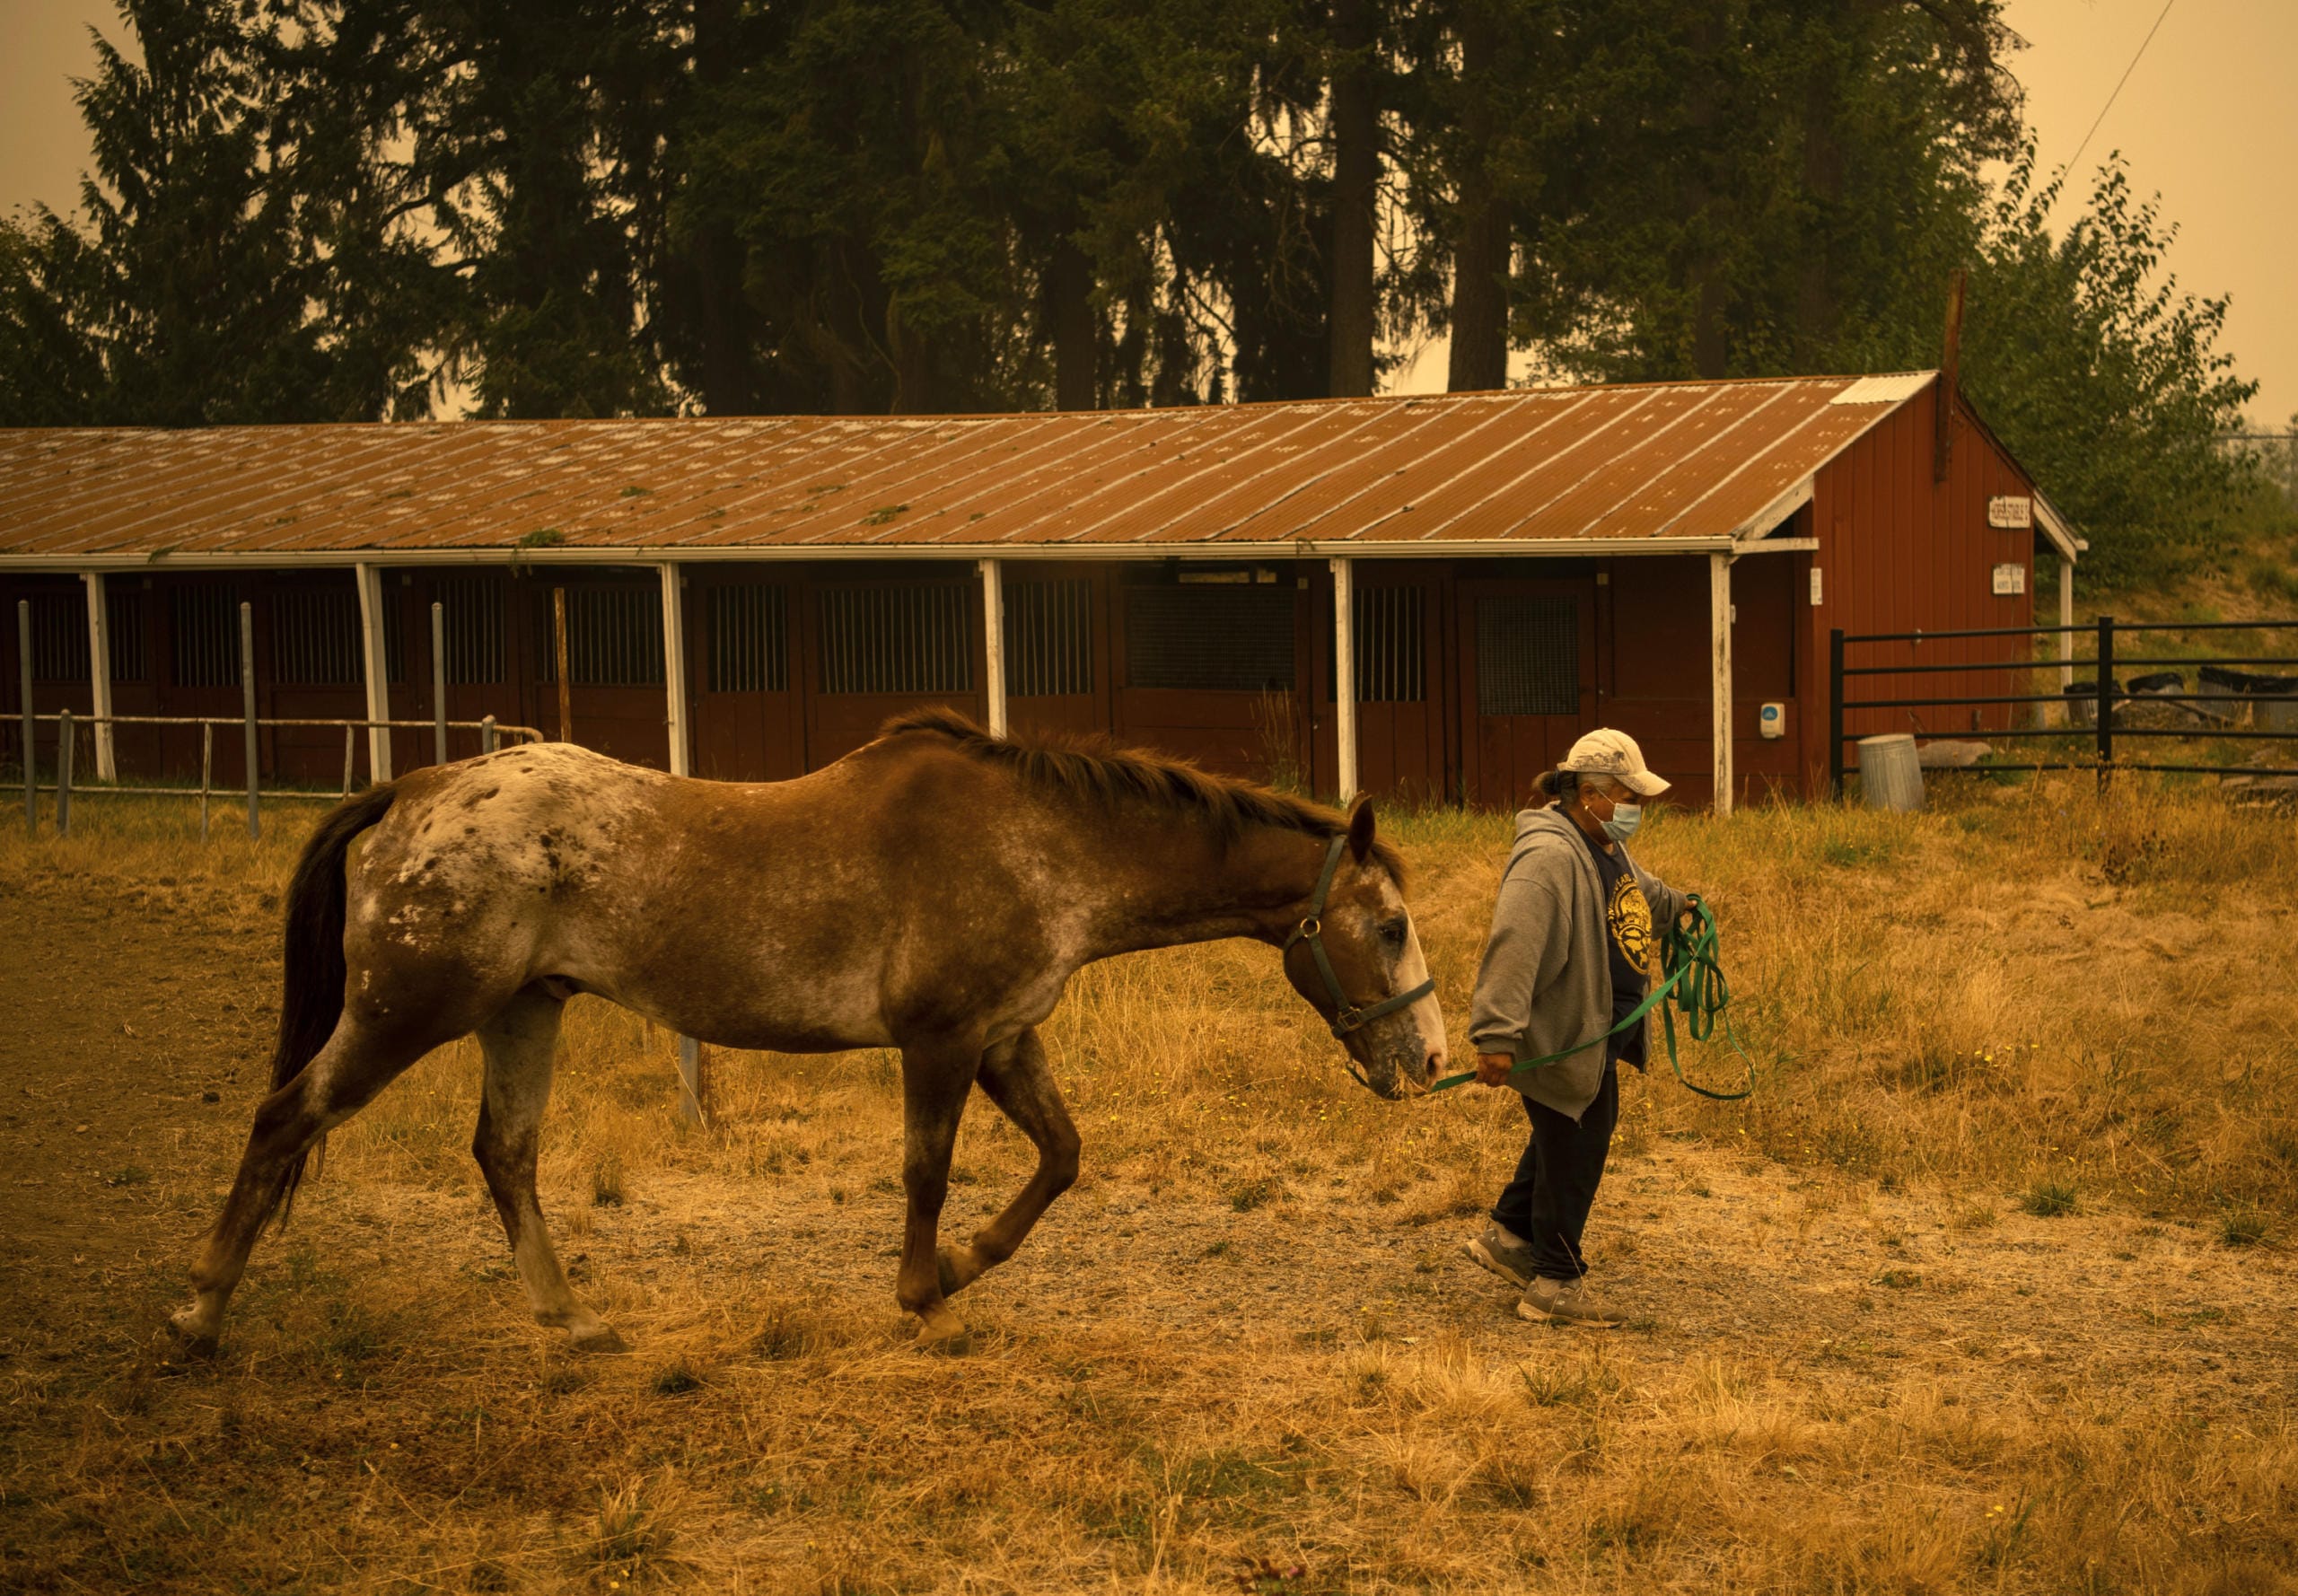 Deborah Mann of Milwaukie, Ore., walks with her horse Pete at the Clark County Fairgrounds on Sept. 11, 2020. Mann boards her horse at Coyote Moon Ranch in Oregon City. The ranch welcomed in many horses from the surrounding areas early this week when families began evacuating, but just two days later they had to evacuate themselves and were able to bring many of the horses up to the Clark County Fairgrounds. Around 160 horses from surrounding areas are now boarded at the fairgrounds and many of the owners are staying on the grounds as well in their RV’s and trailers.